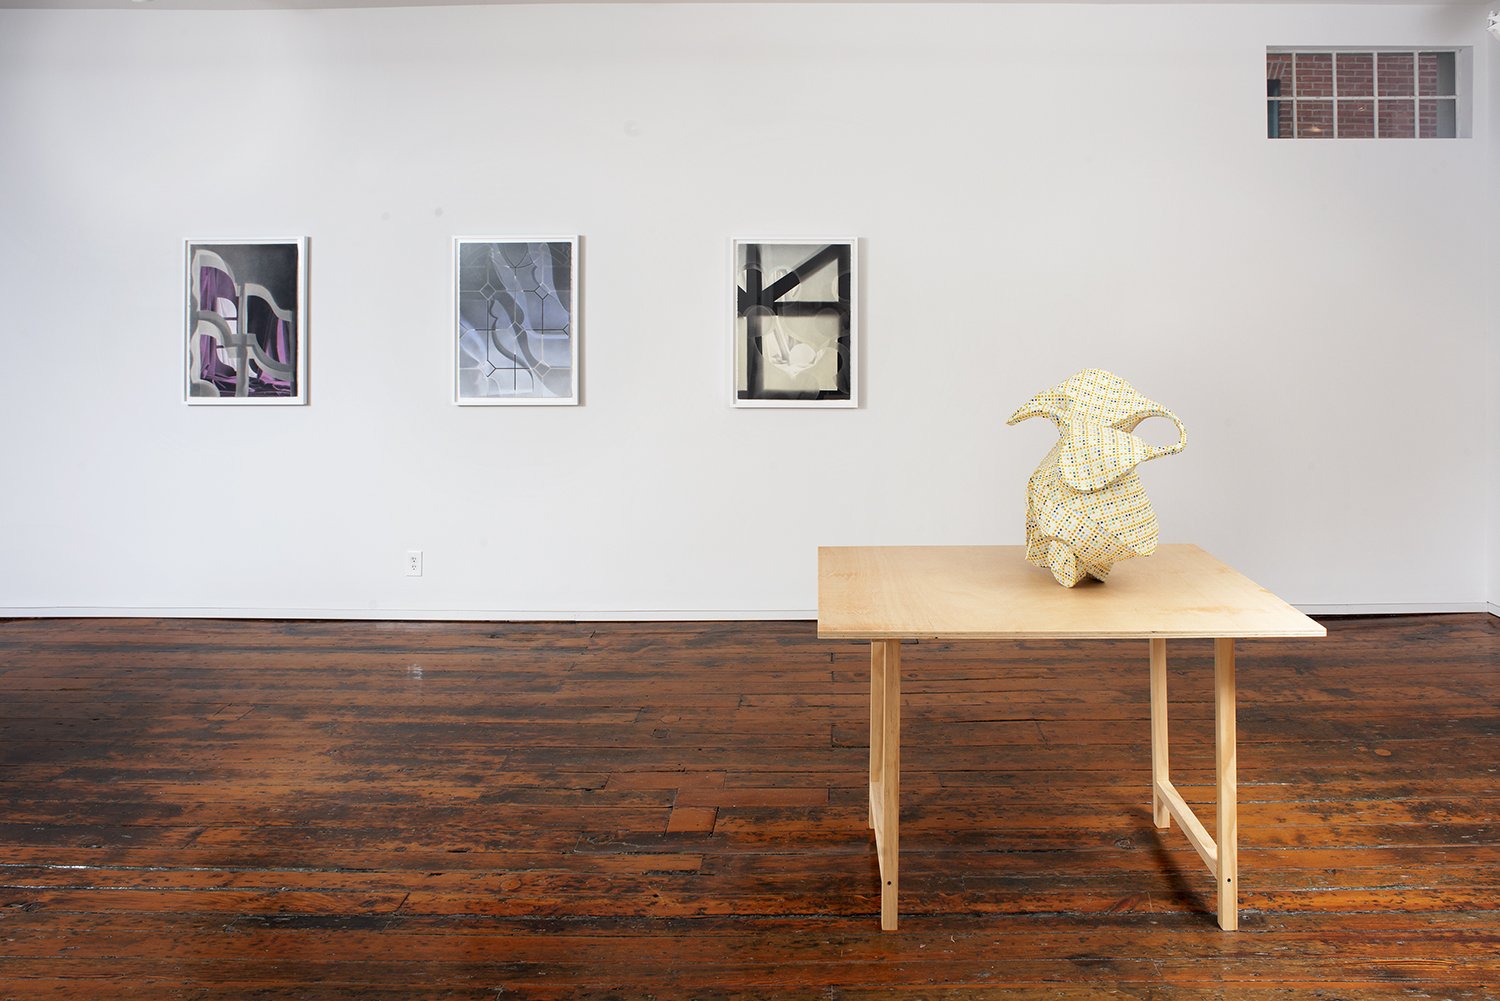  Installation view,  Breather , Pentimenti Gallery 